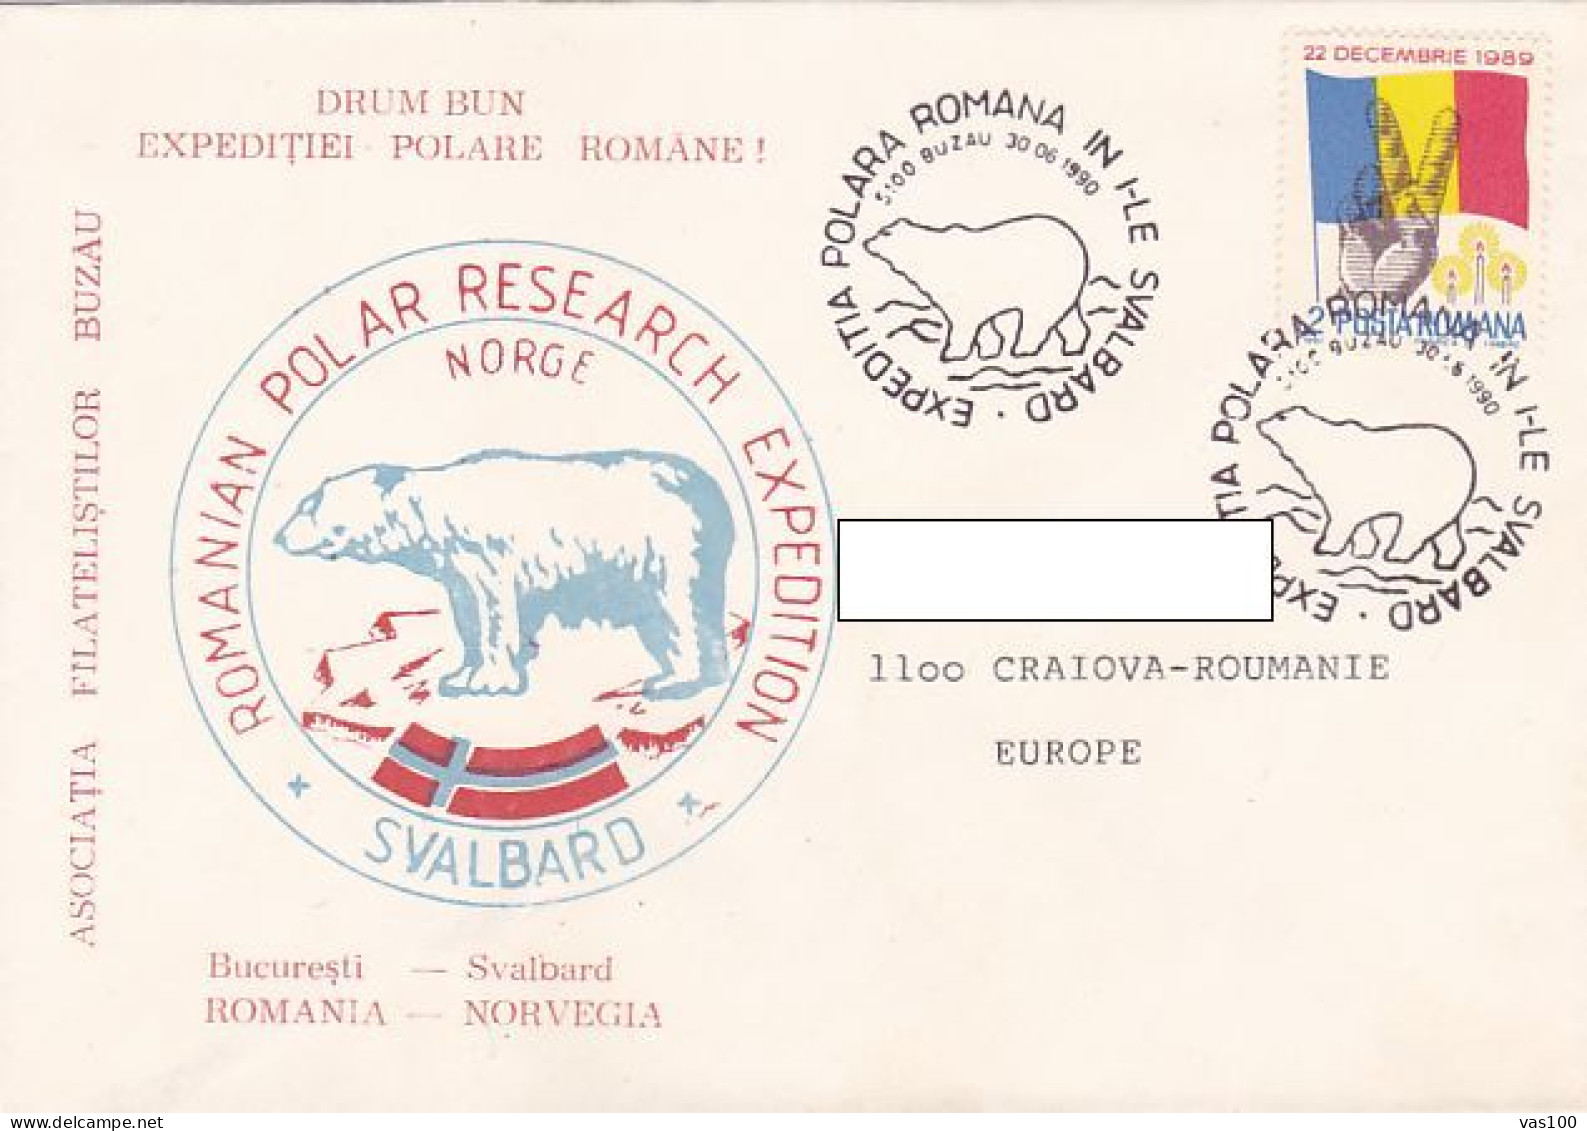 NORTH POLE, ARCTIC EXPEDITION, ROMANIAN EXPEDITION IN SVALBARD, POLAR BEAR, SPECIAL COVER, 1990, ROMANIA - Arctische Expedities